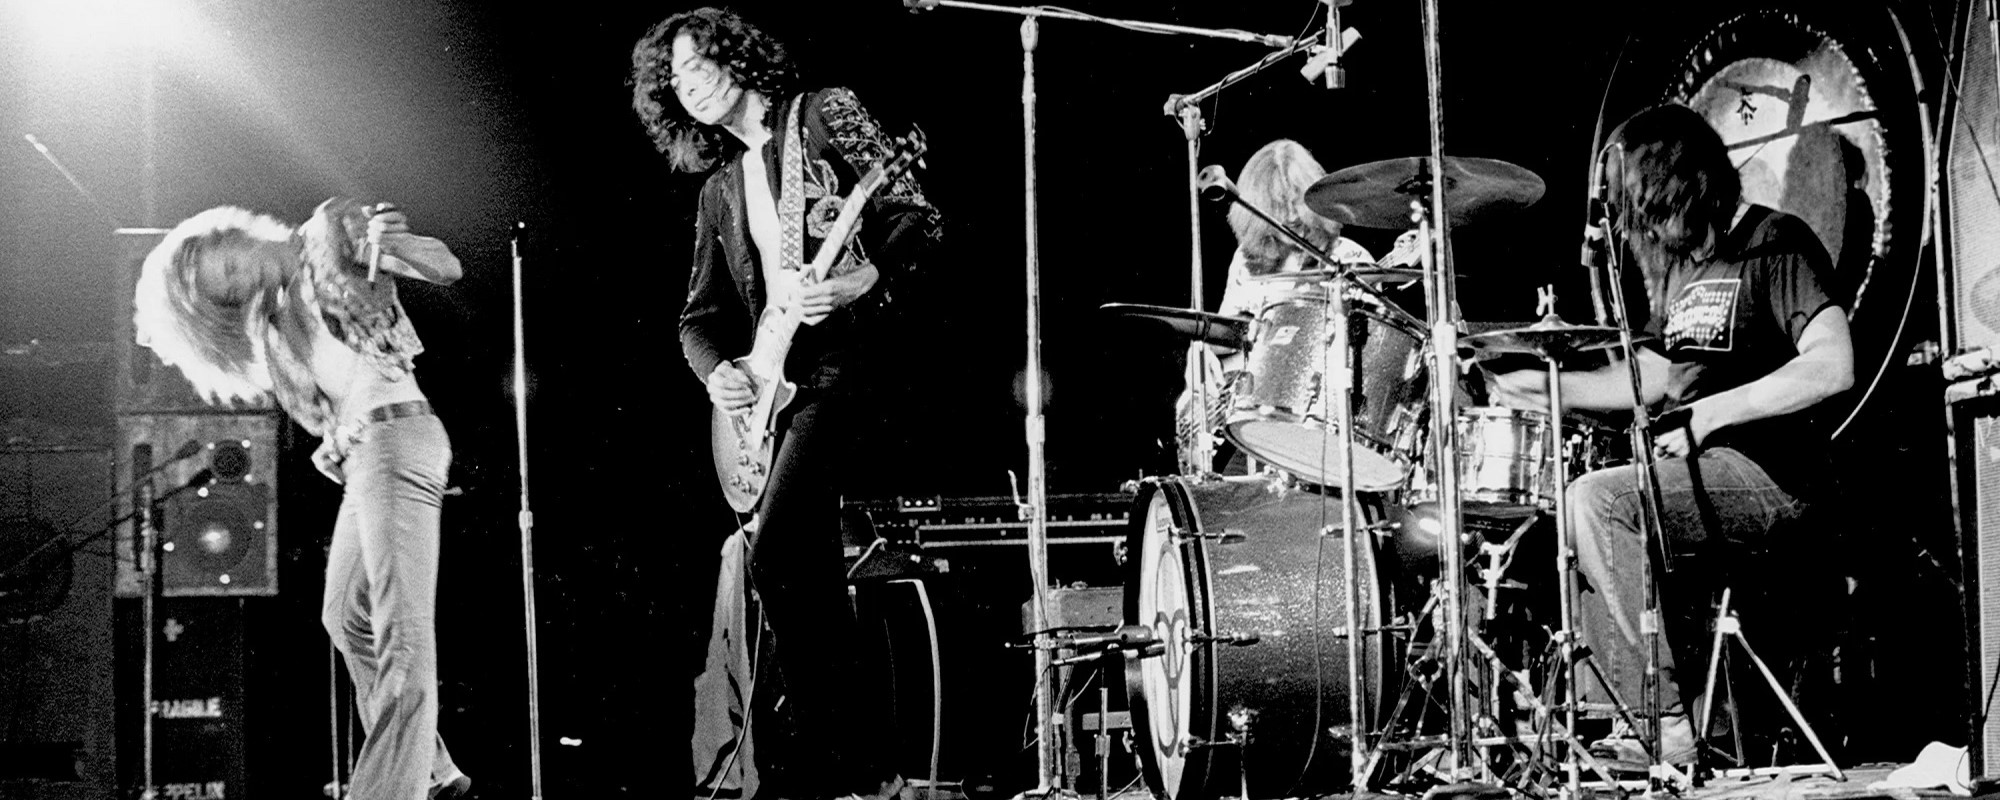 Rights to First Officially Sanctioned Led Zeppelin Documentary Acquired by Sony Pictures Classics